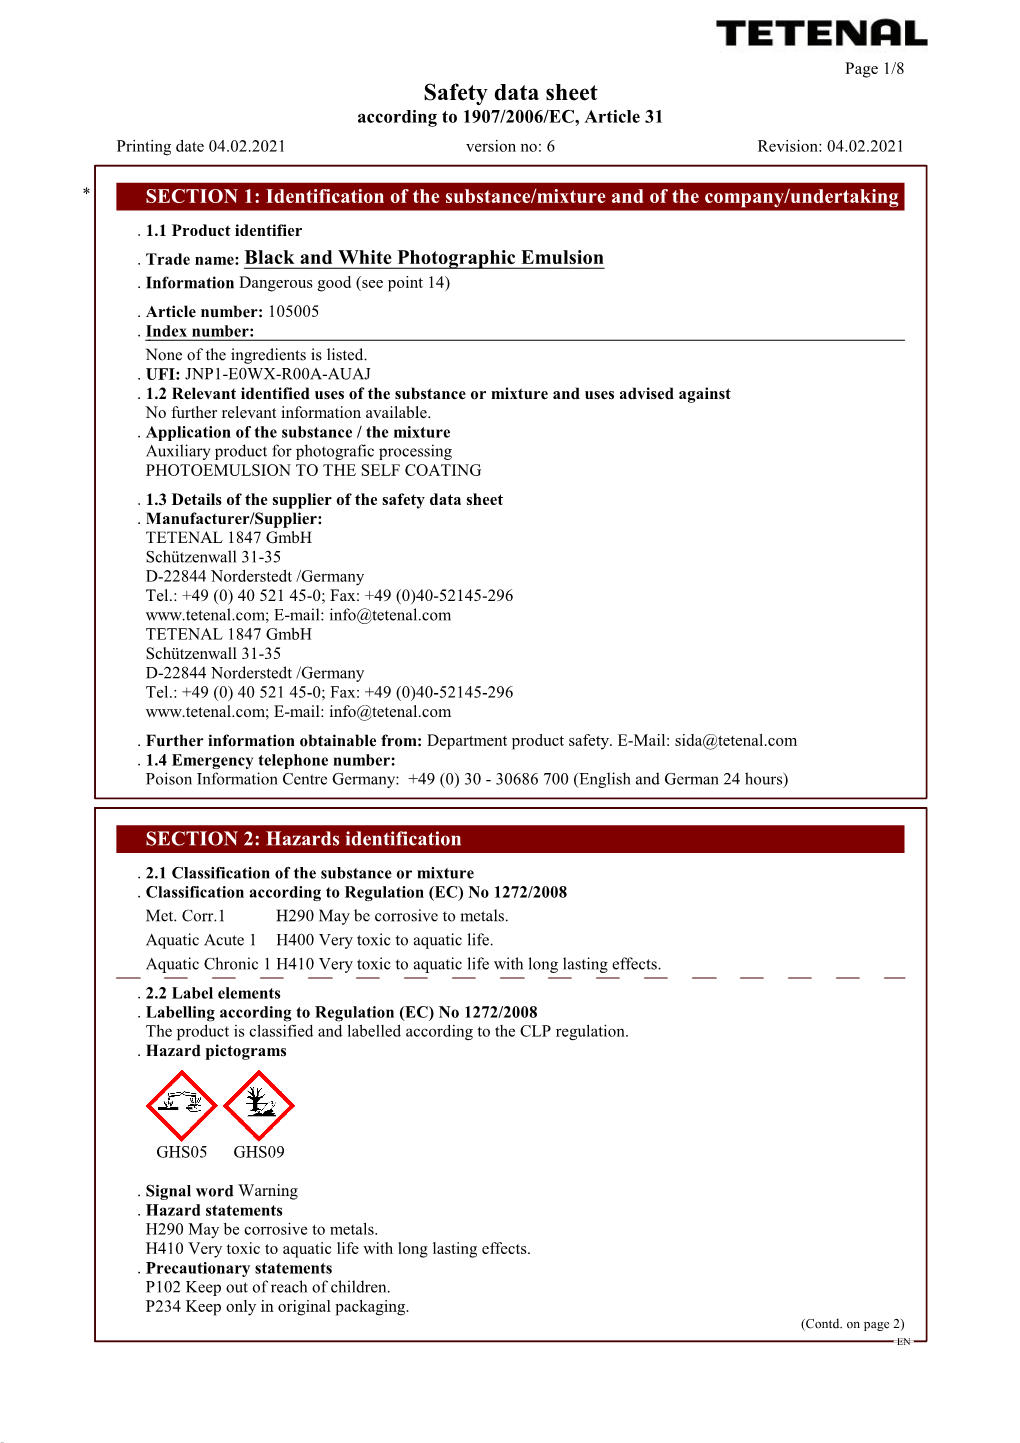 Safety Data Sheet According to 1907/2006/EC, Article 31 Printing Date 04.02.2021 Version No: 6 Revision: 04.02.2021